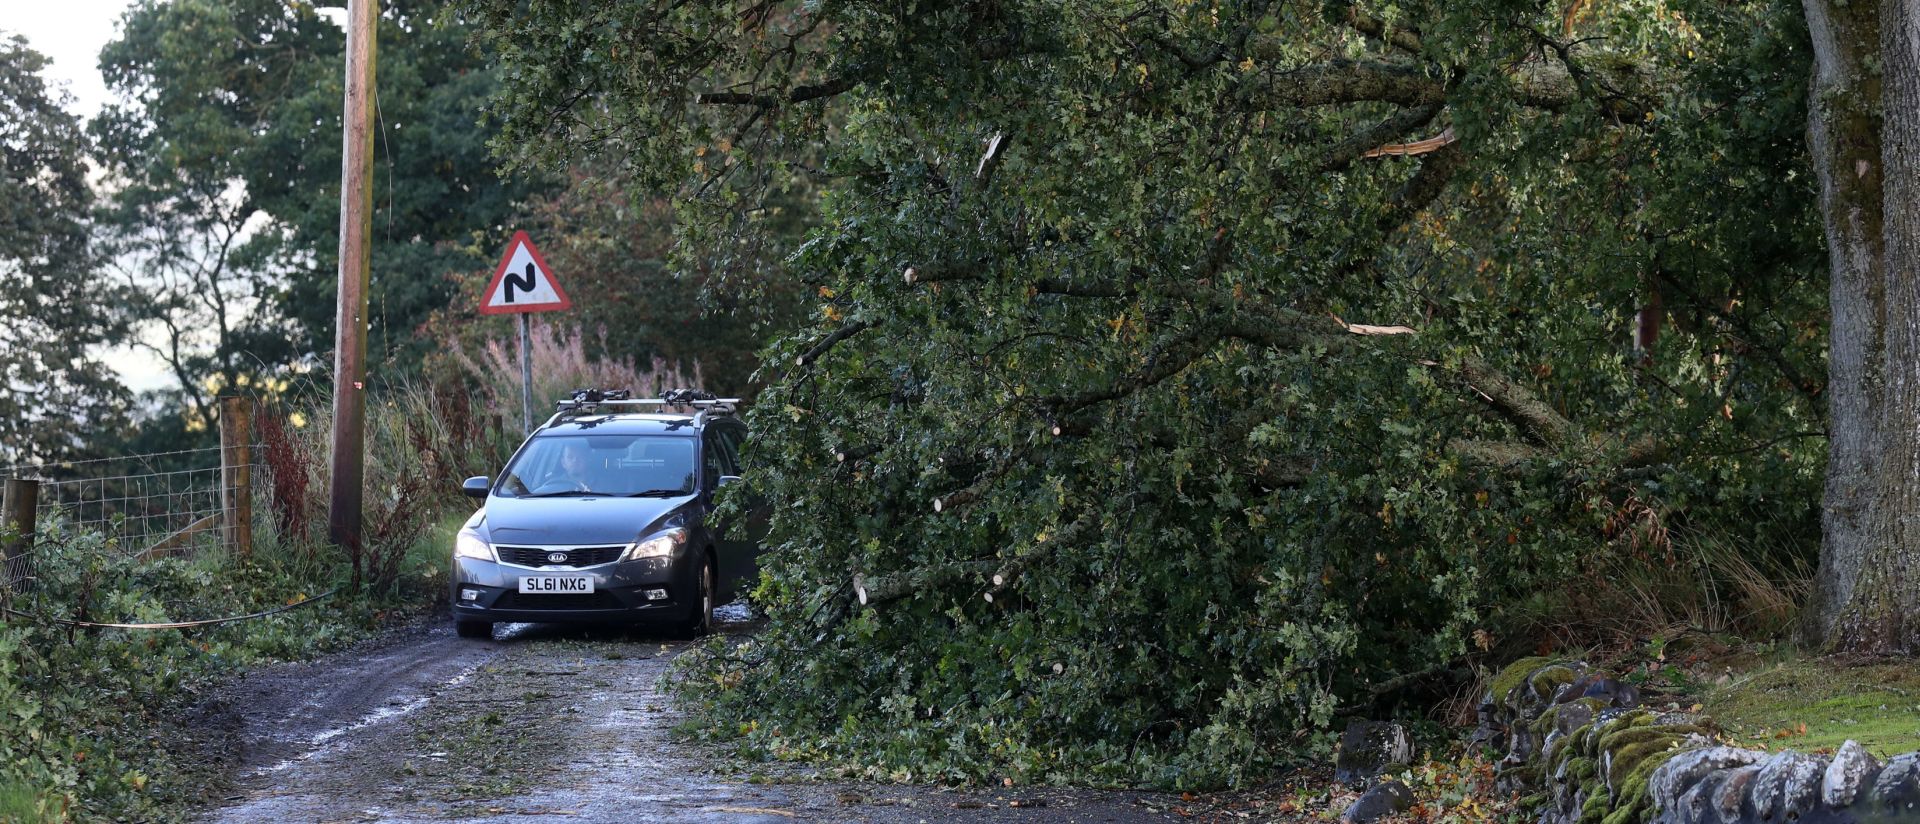 Autumn weather Sep 19th 2018 A car makes its way past a fallen tree near Fintry, central Scotland, after it was blown down in high winds brought by Storm Ali. Andrew Milligan  Photo: Press Association/PIXSELL